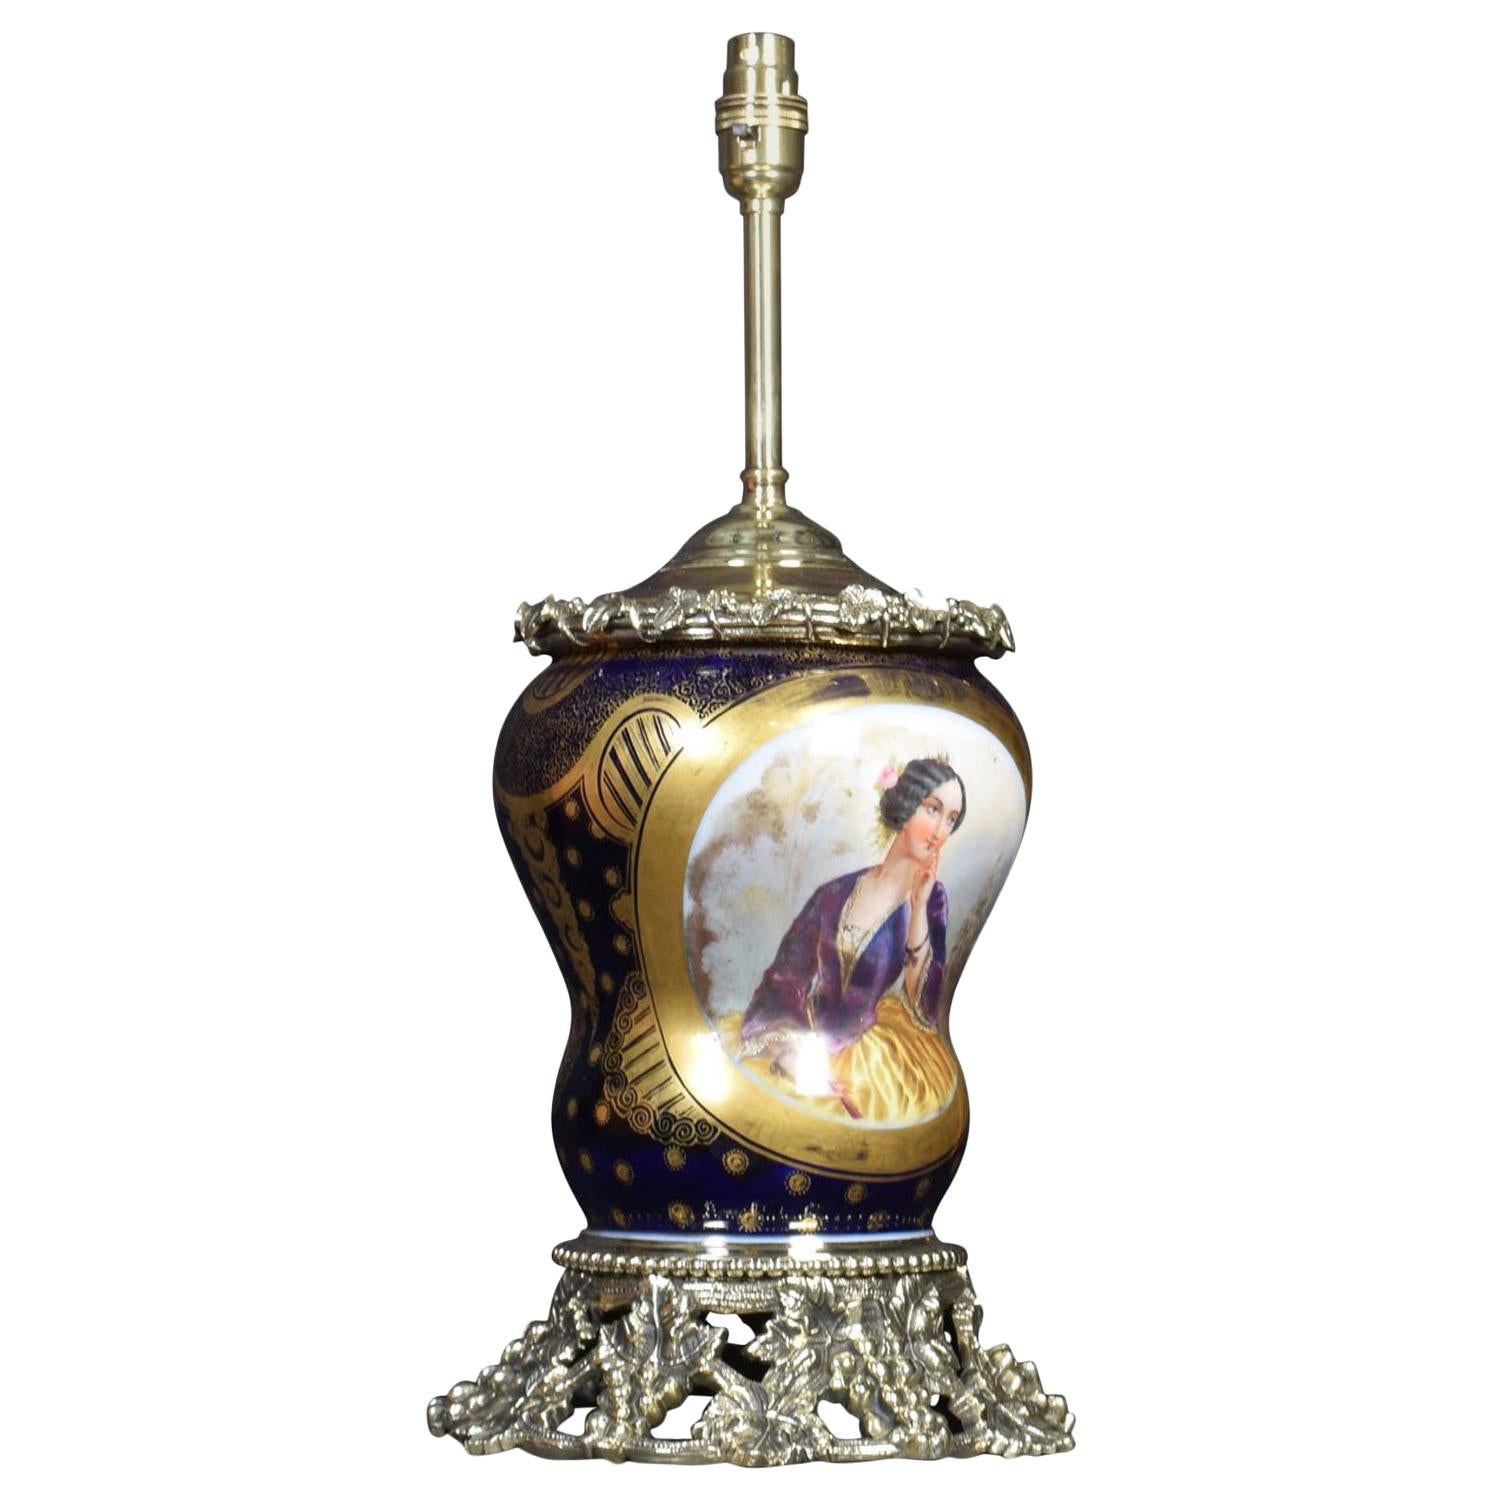 Large Antique French Sevres Style Ormolu-Mounted Table Lamp